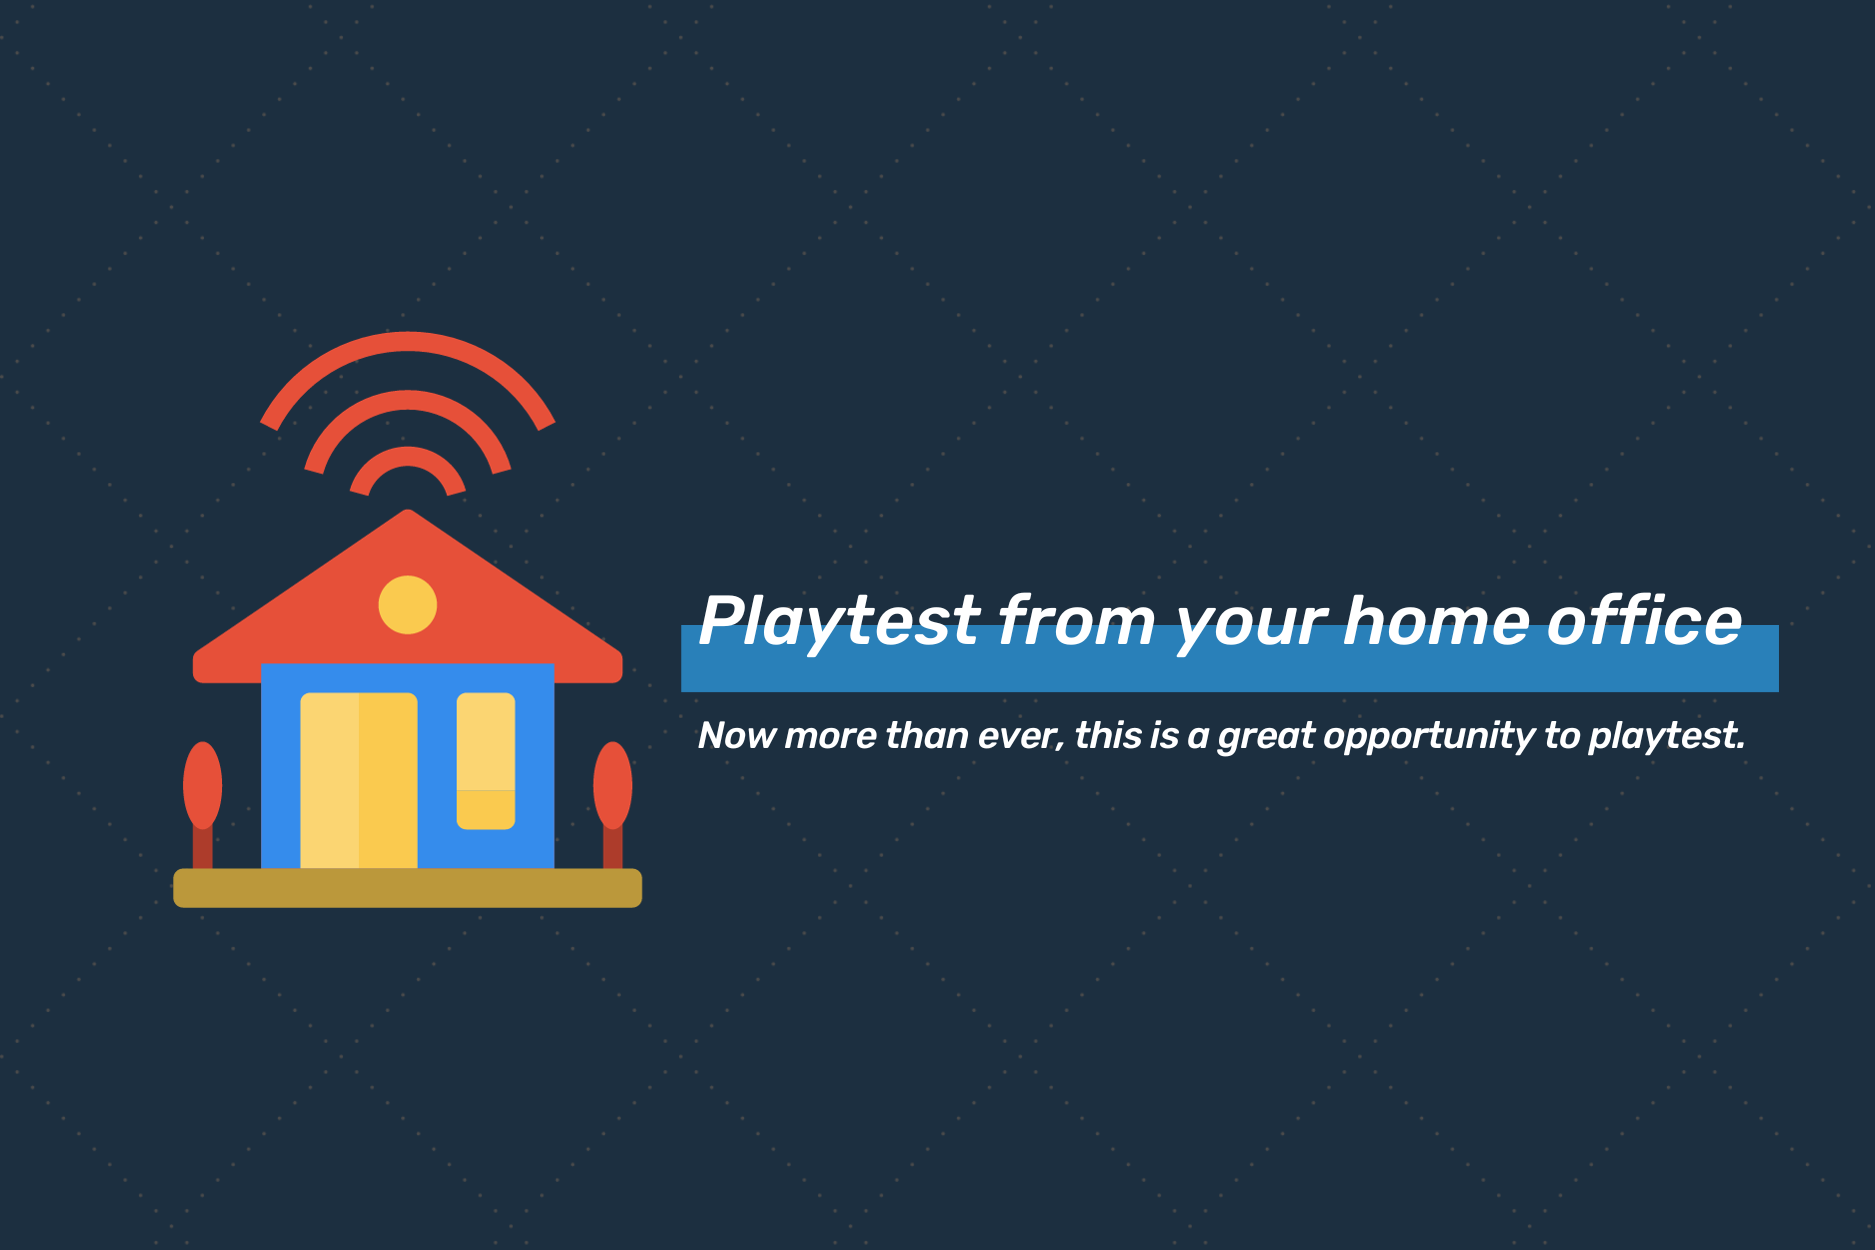 Playtest from your home office with PlaytestCloud